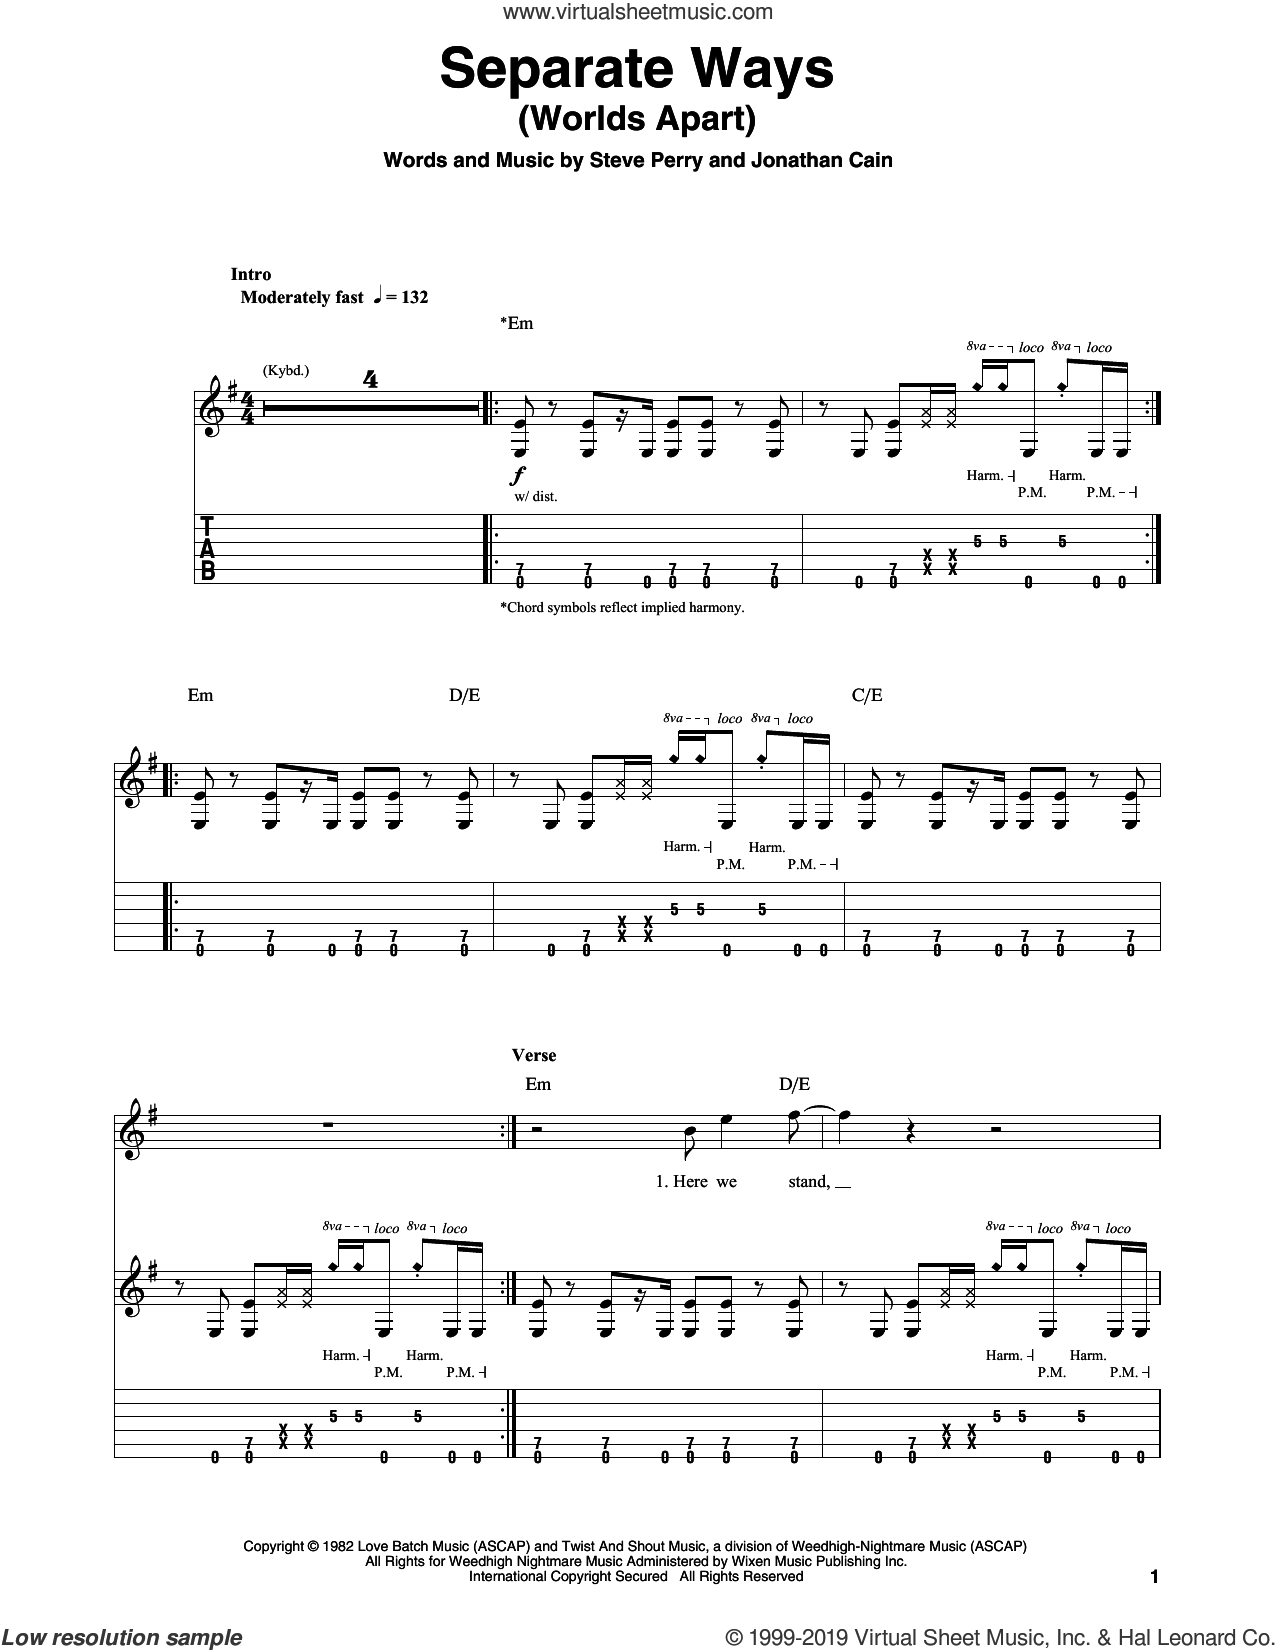 Journey - Separate Ways (Worlds Apart) sheet music for guitar